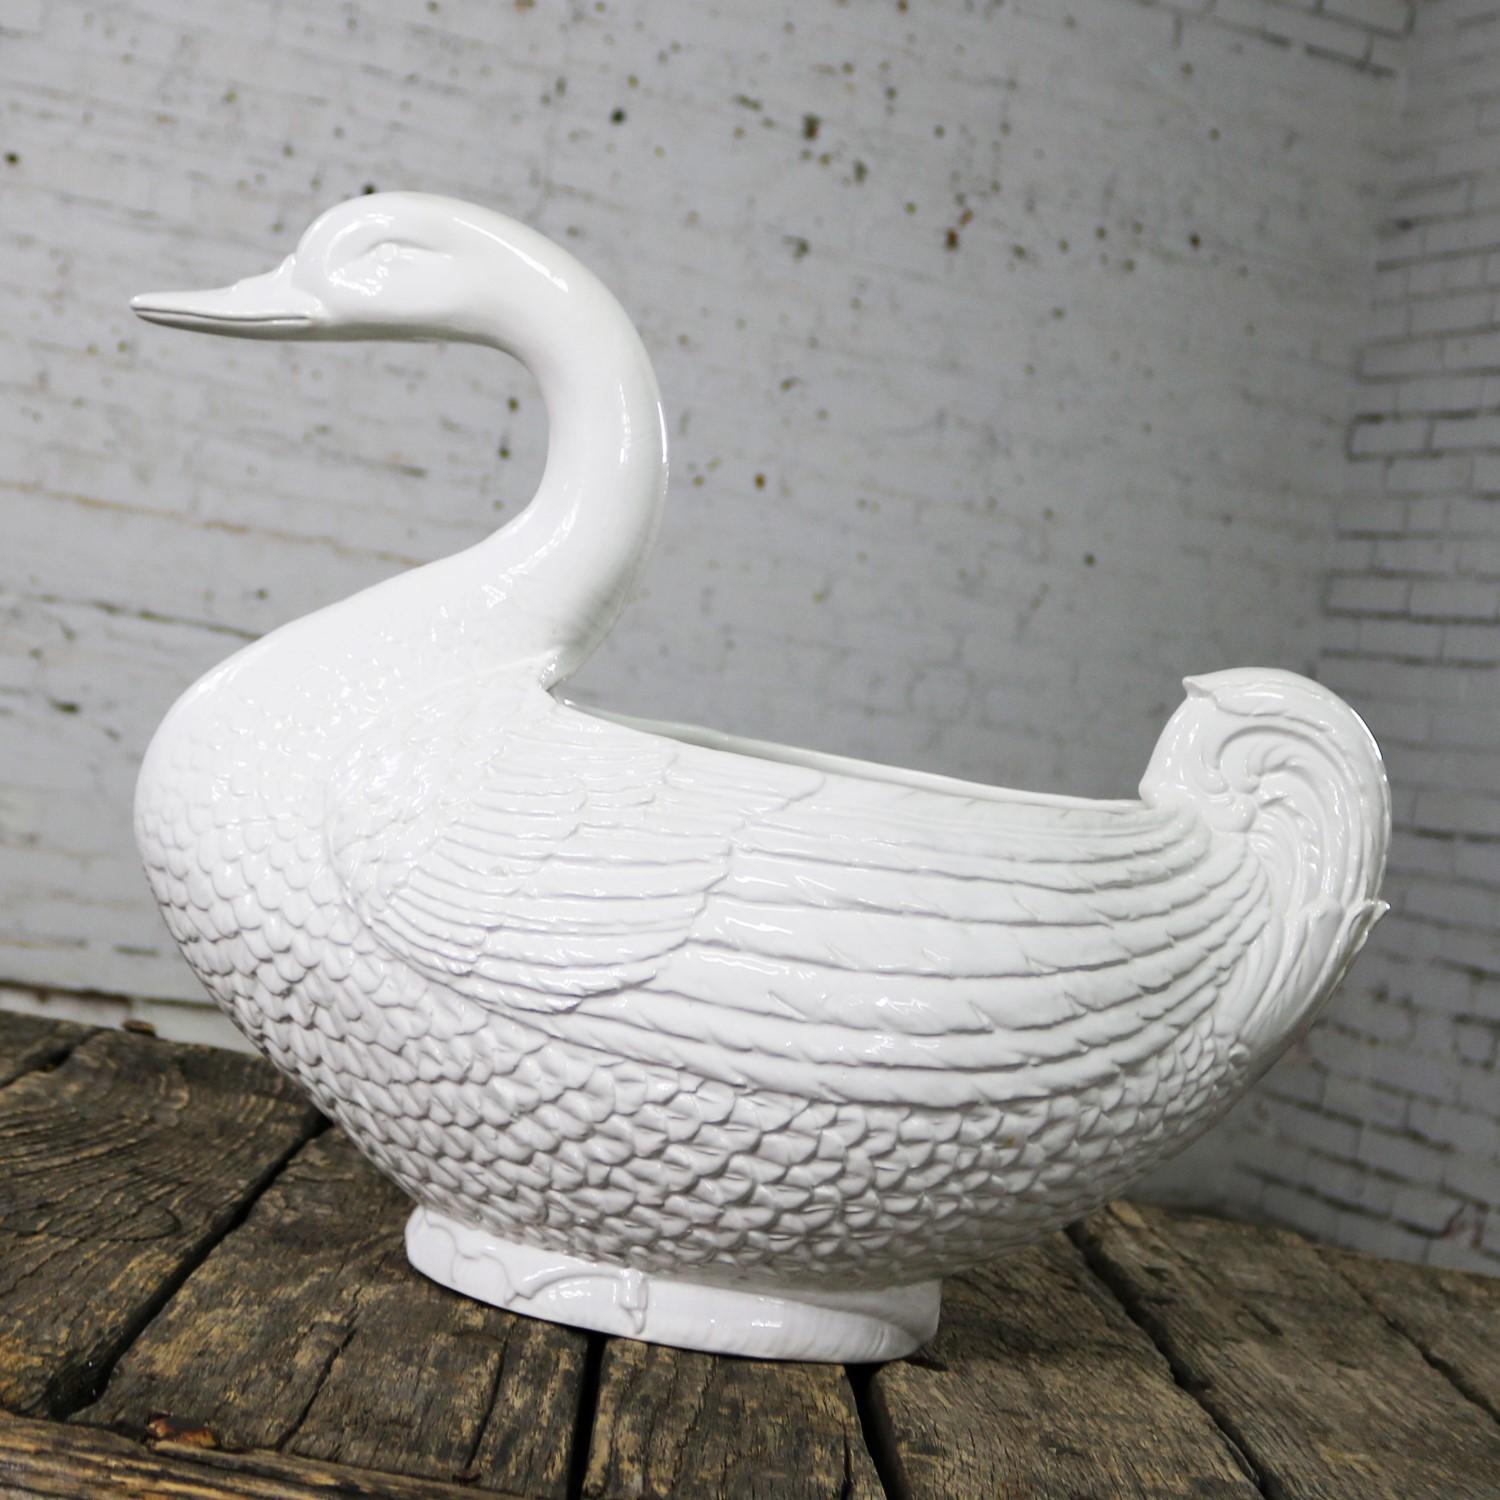 Large Pure White Porcelain Swan Jardinière Planter or Serving Tureen In Good Condition For Sale In Topeka, KS